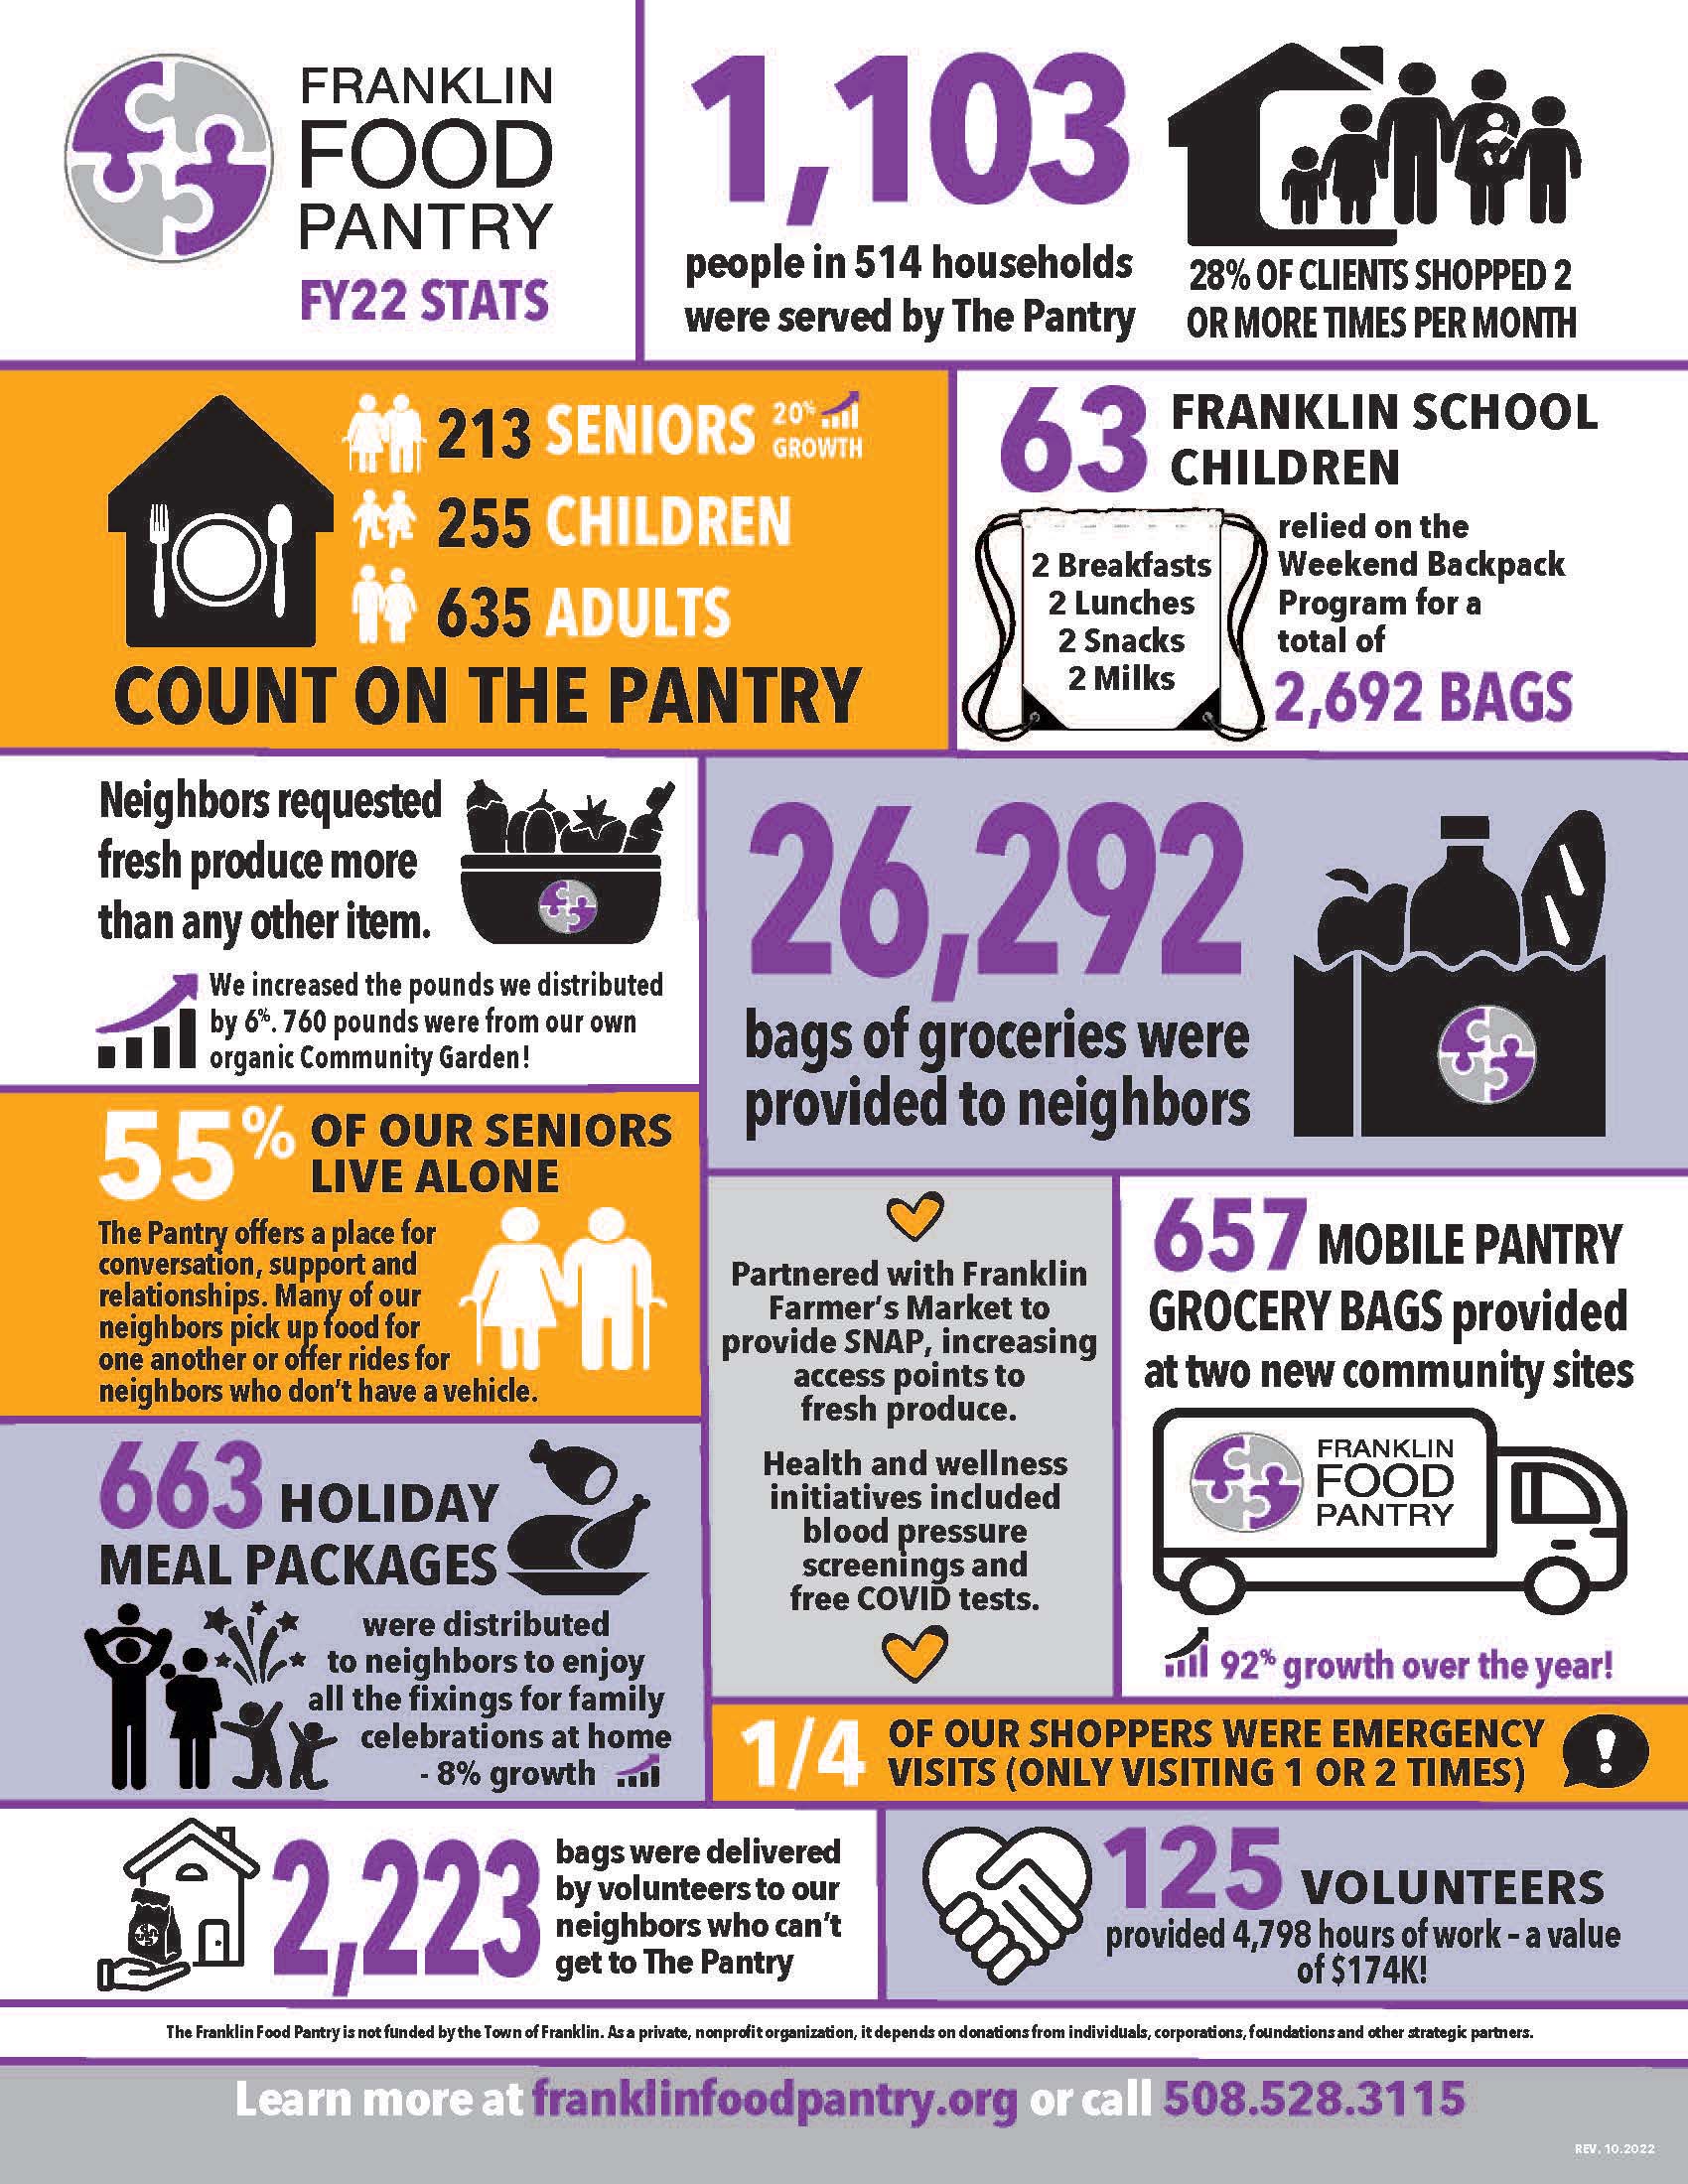 Franklin Food Pantry Info Graphic 2022